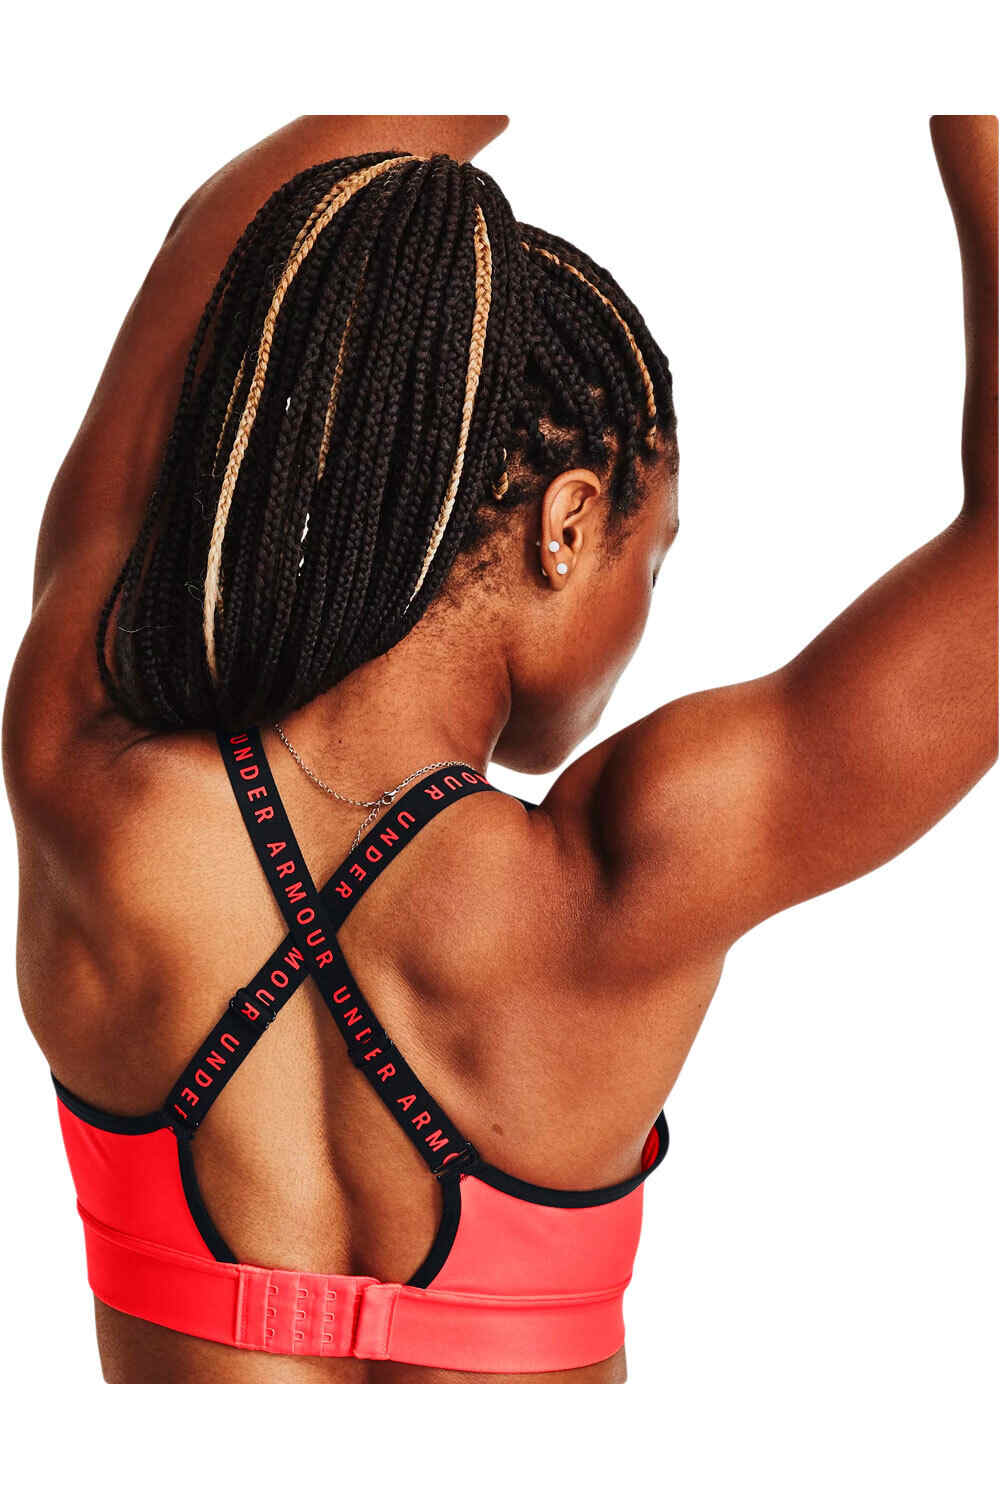 Under Armour Infinity Mid Covered Sports Bra beta/black - Ropa interior técnica